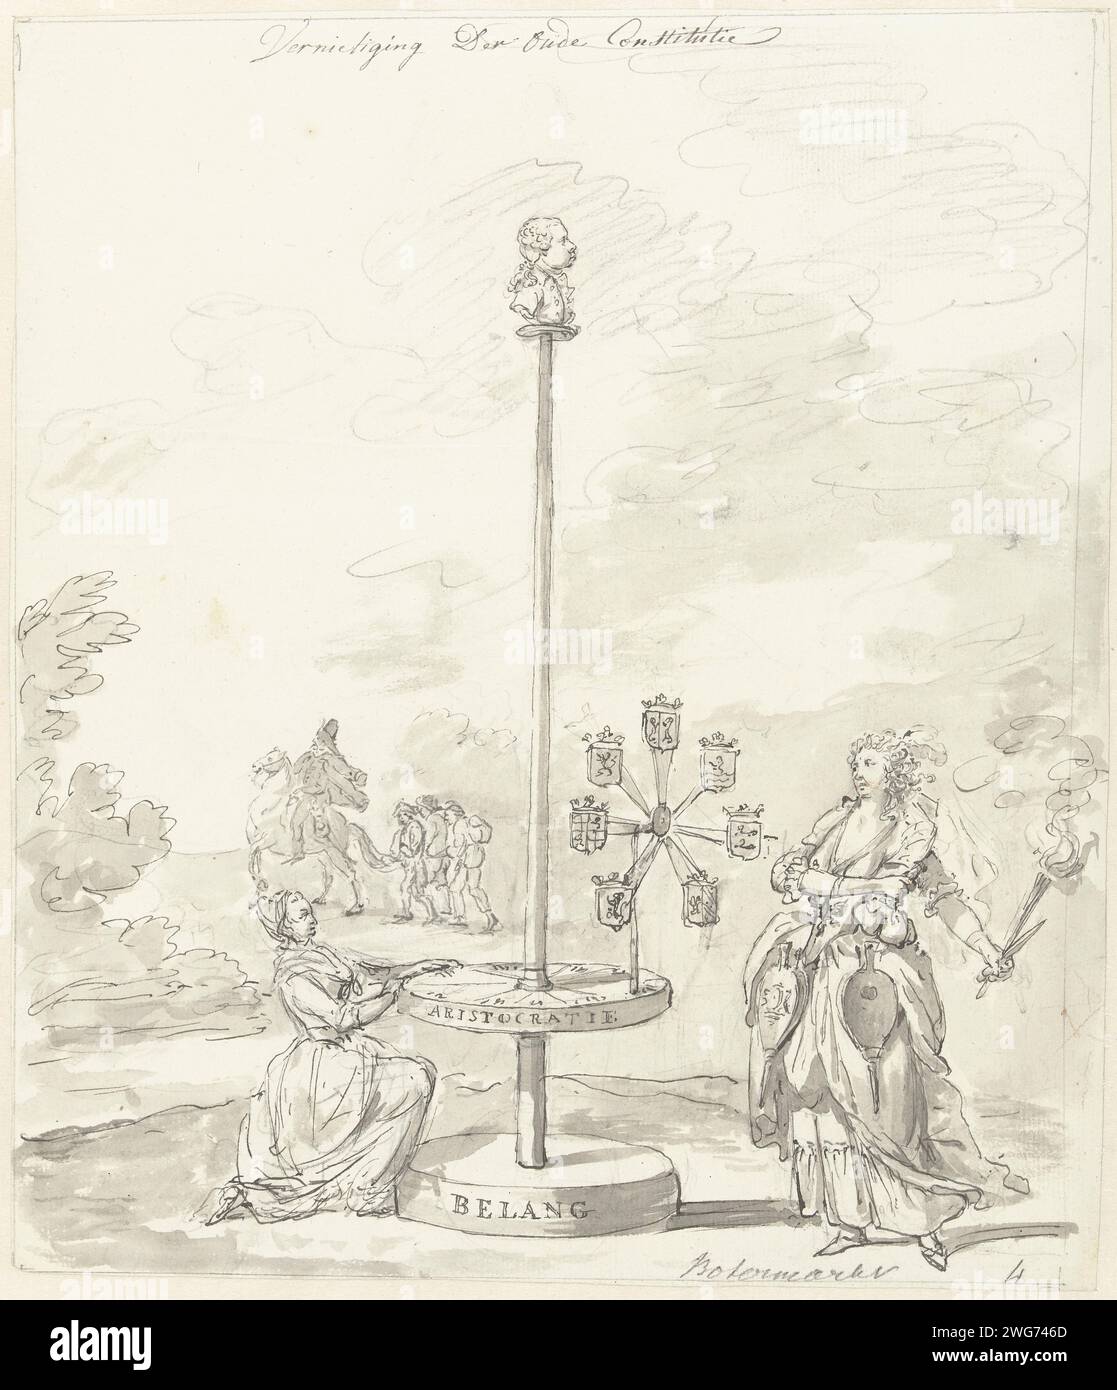 The destruction of the old constitution, decoration on the Botermarkt, 1795, Anonymous, 1795 drawing The envy standing with burning torch at the wheel of aristocracy. On top of a bust of Prince Willem V. in the background fleeing civilians. Not used design for the decoration 'Destruction of the old constitution' on the Botermarkt in Amsterdam at the Alliantie festival on June 19, 1795. Netherlands paper. ink. chalk pen / brush political caricatures and satires. the old government and its supporters (after revolution). alliance, league, union, foedus. festivities on events of national importanc Stock Photo